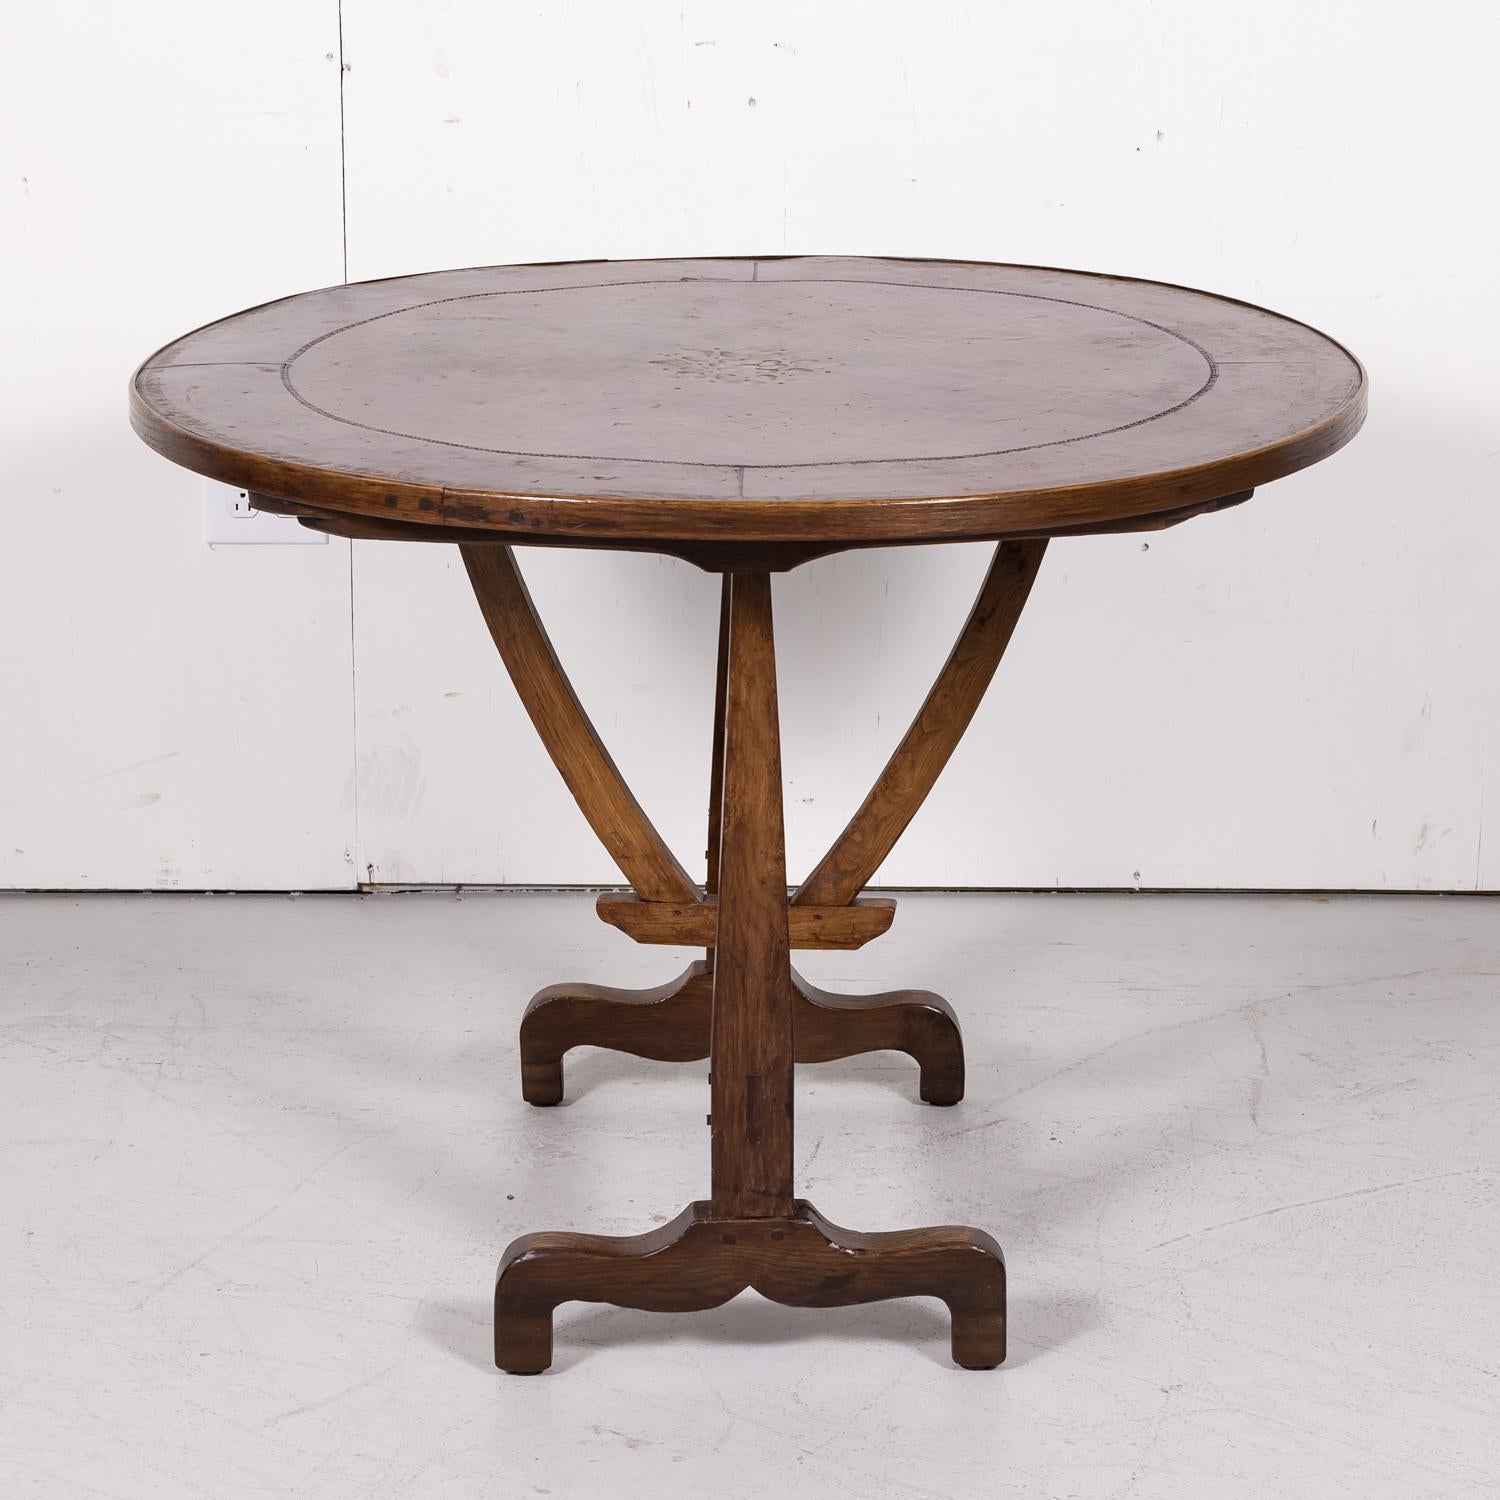 Early 19th Century Rare 19th Century French Charles X Period Tilt-Top Wine Tasting or Vendage Table